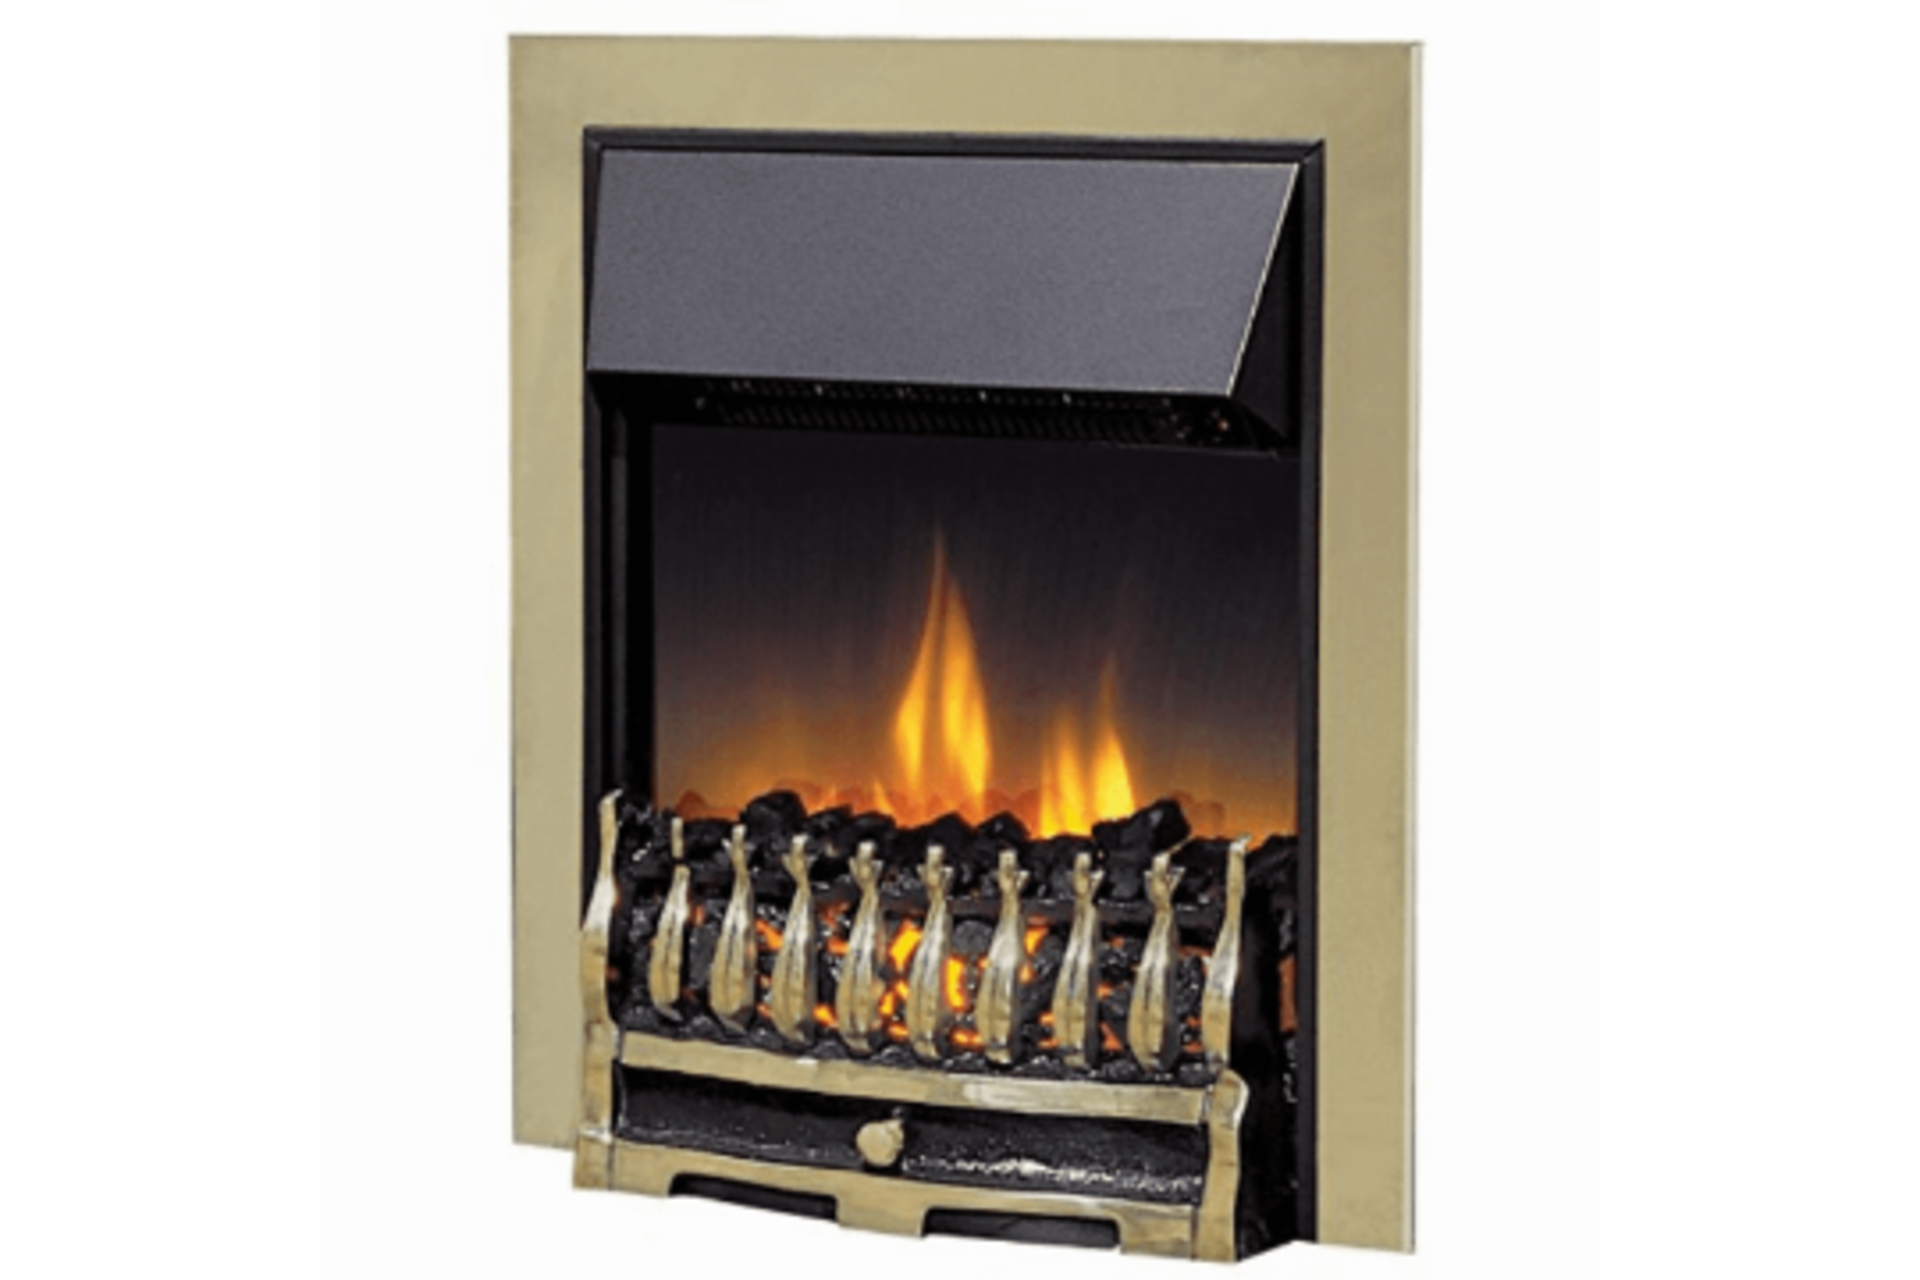 TRADE LOT 4 X BRAND NEW BOXED Dimplex Wynford Brass Optiflame Inset Electric Fire RRP £370.00 - Image 2 of 2